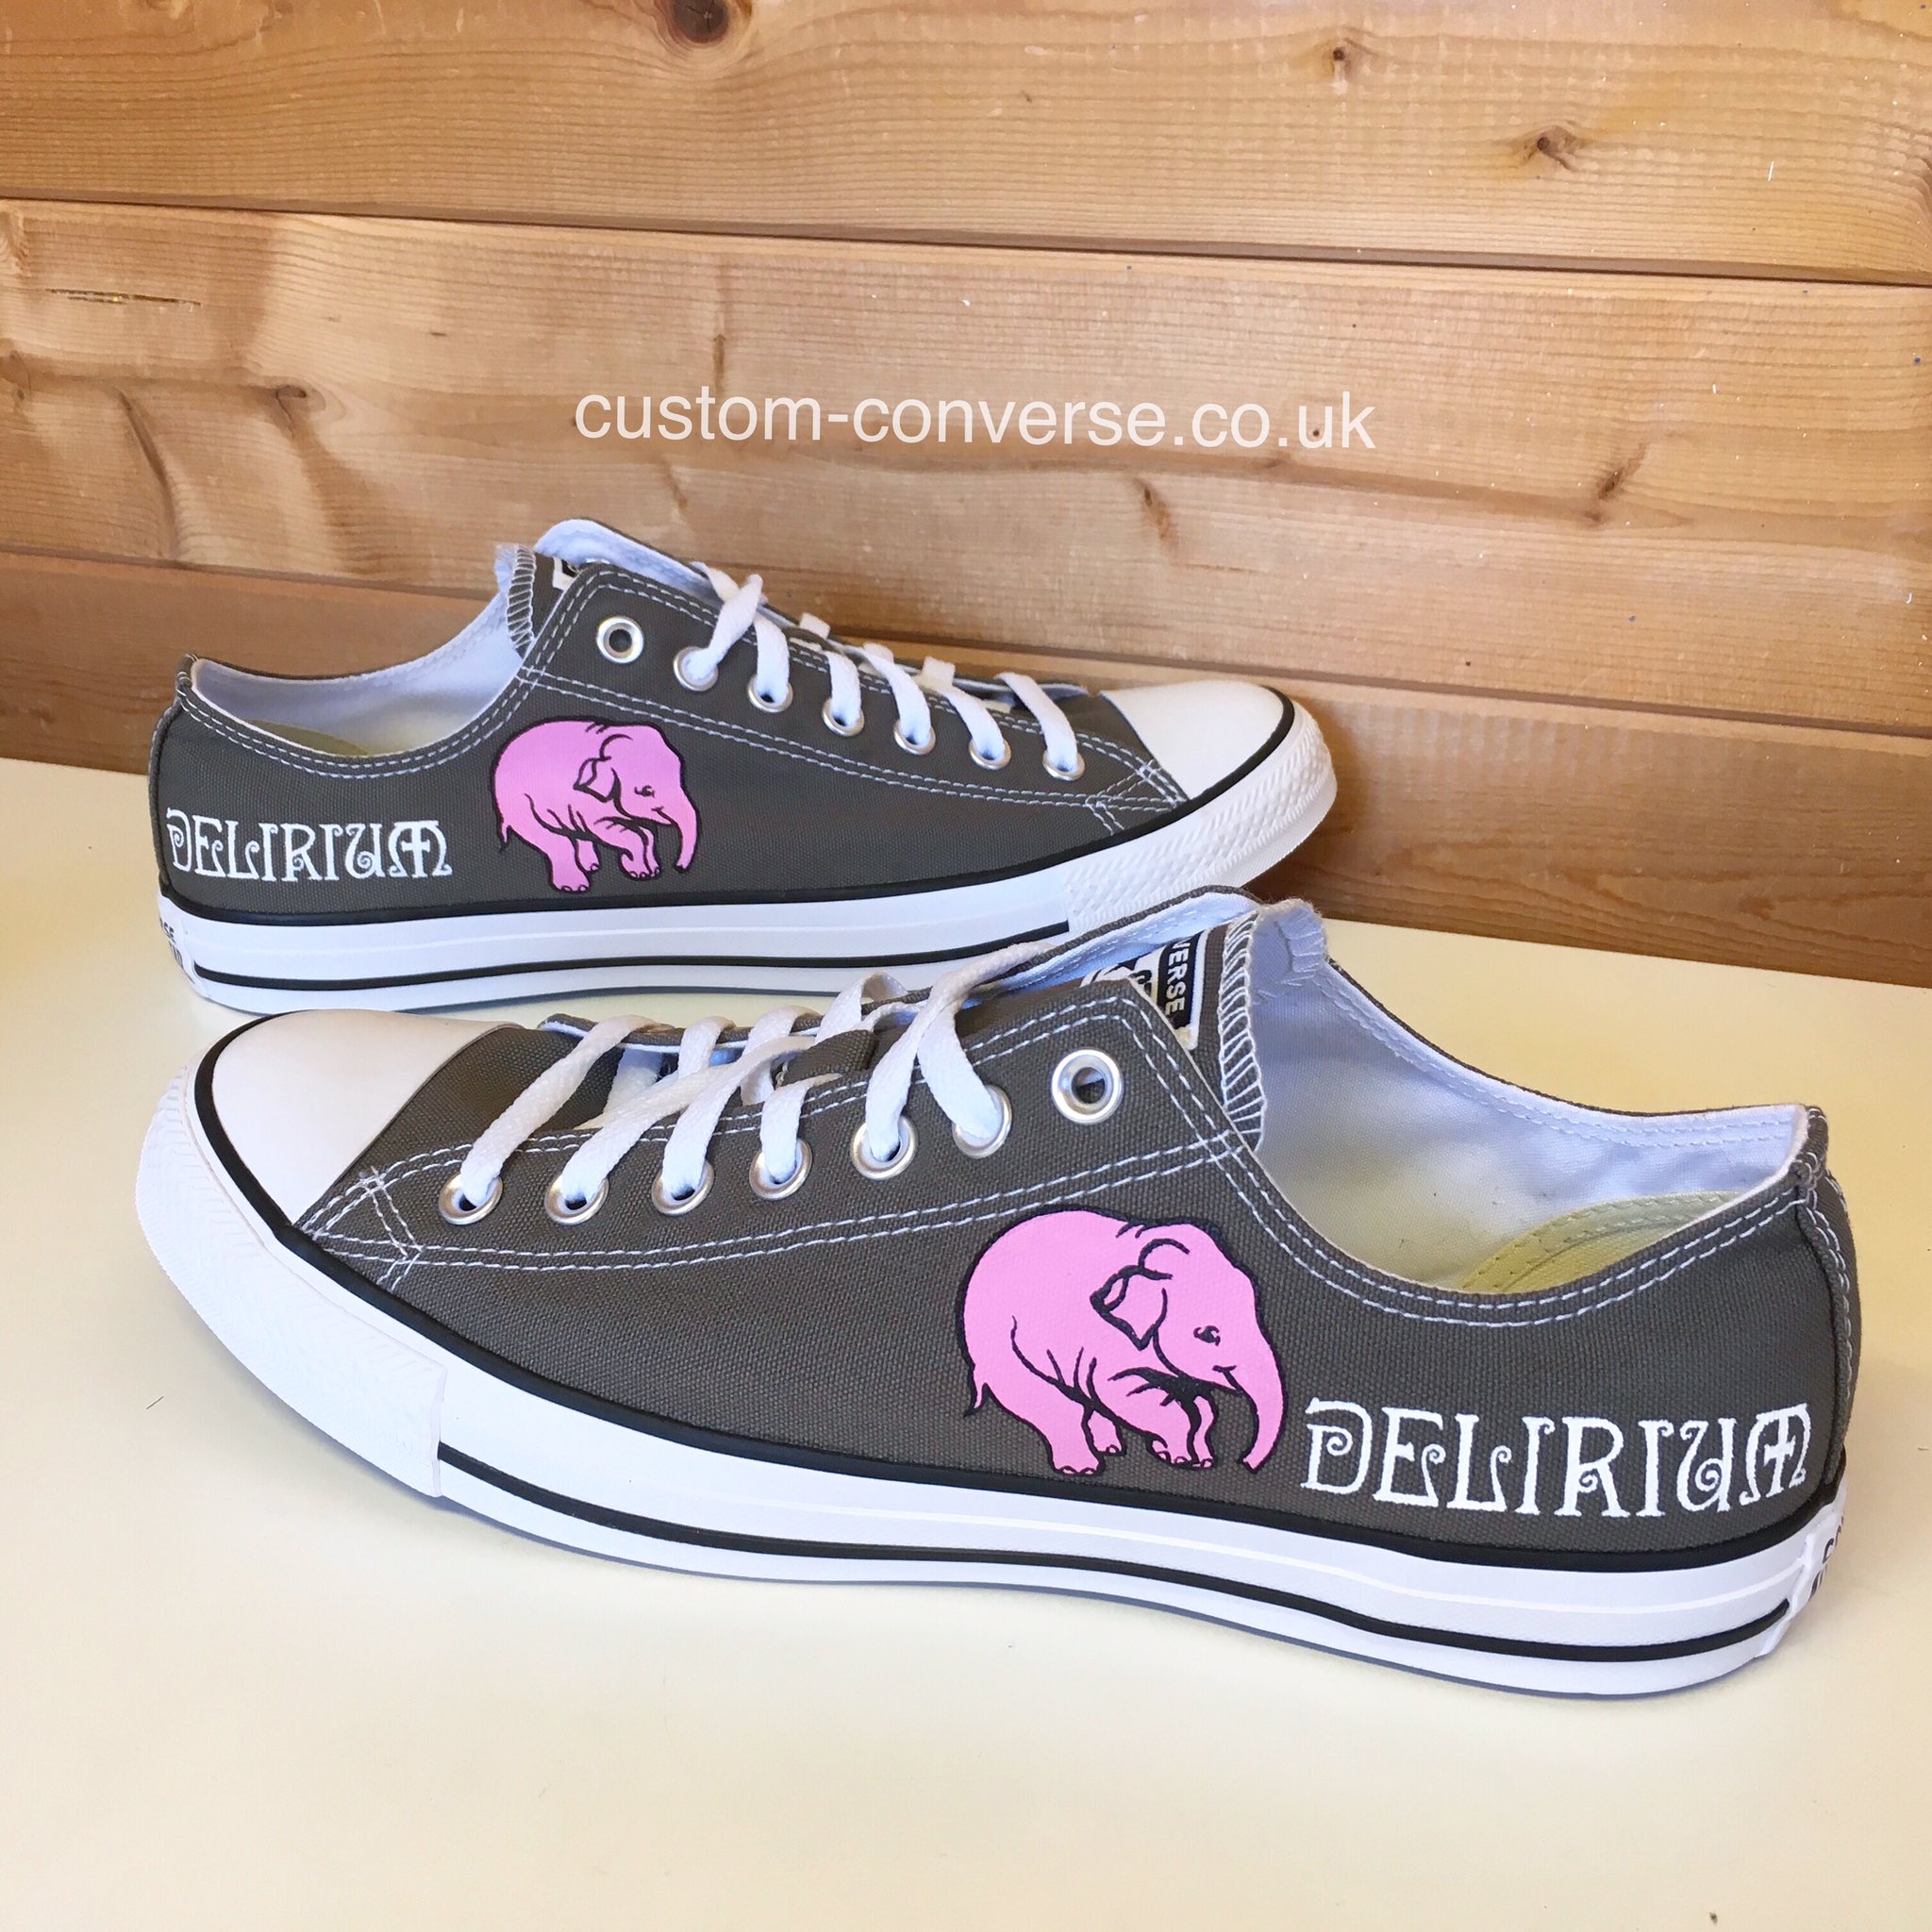 Custom Converse on "A great unique Christmas gift for of @Deliriumbrewery beer! 💕🐘 https://t.co/W9QMr0awxX" / Twitter